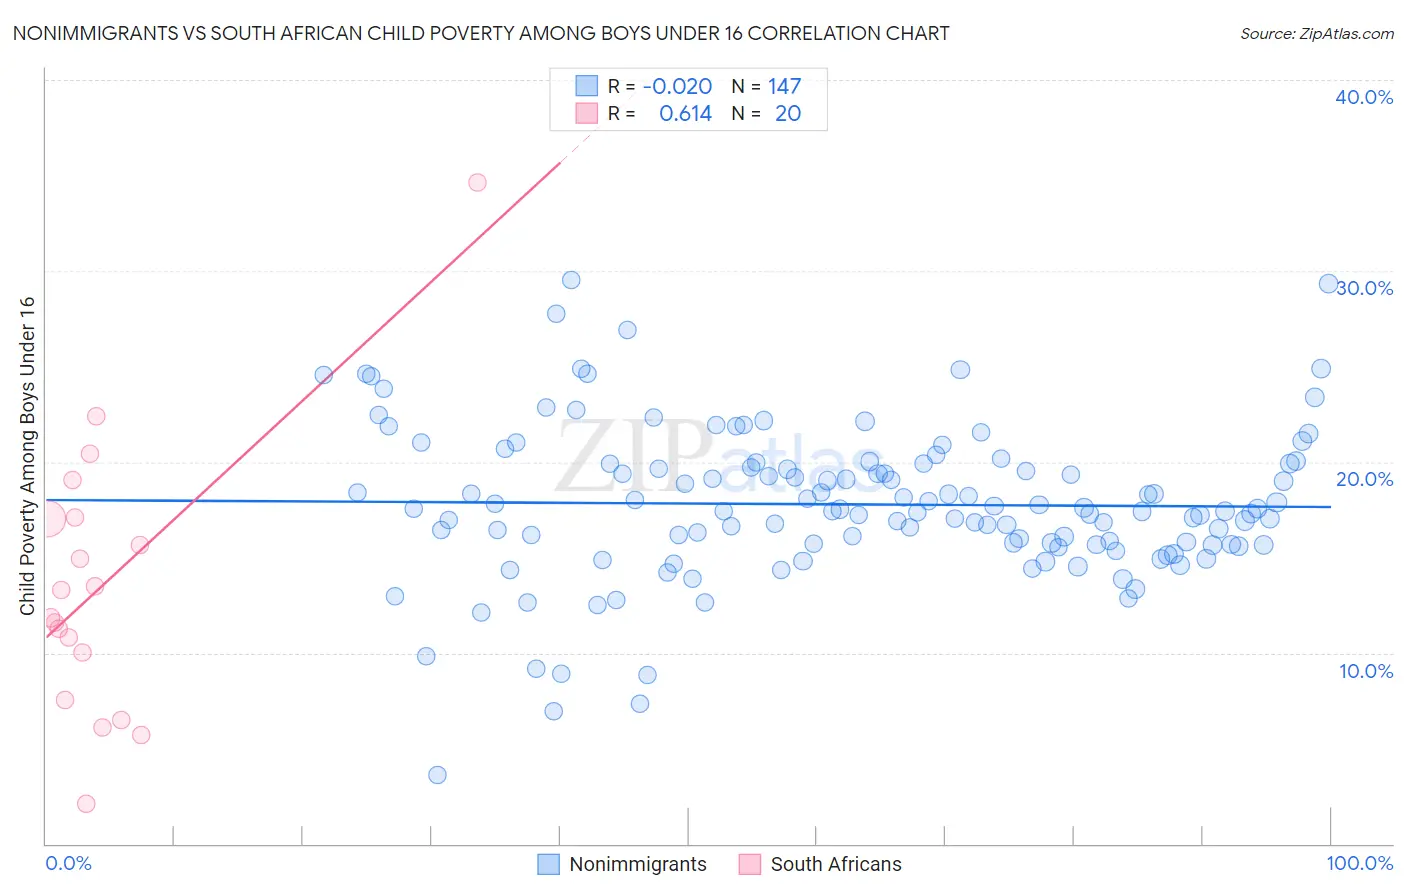 Nonimmigrants vs South African Child Poverty Among Boys Under 16